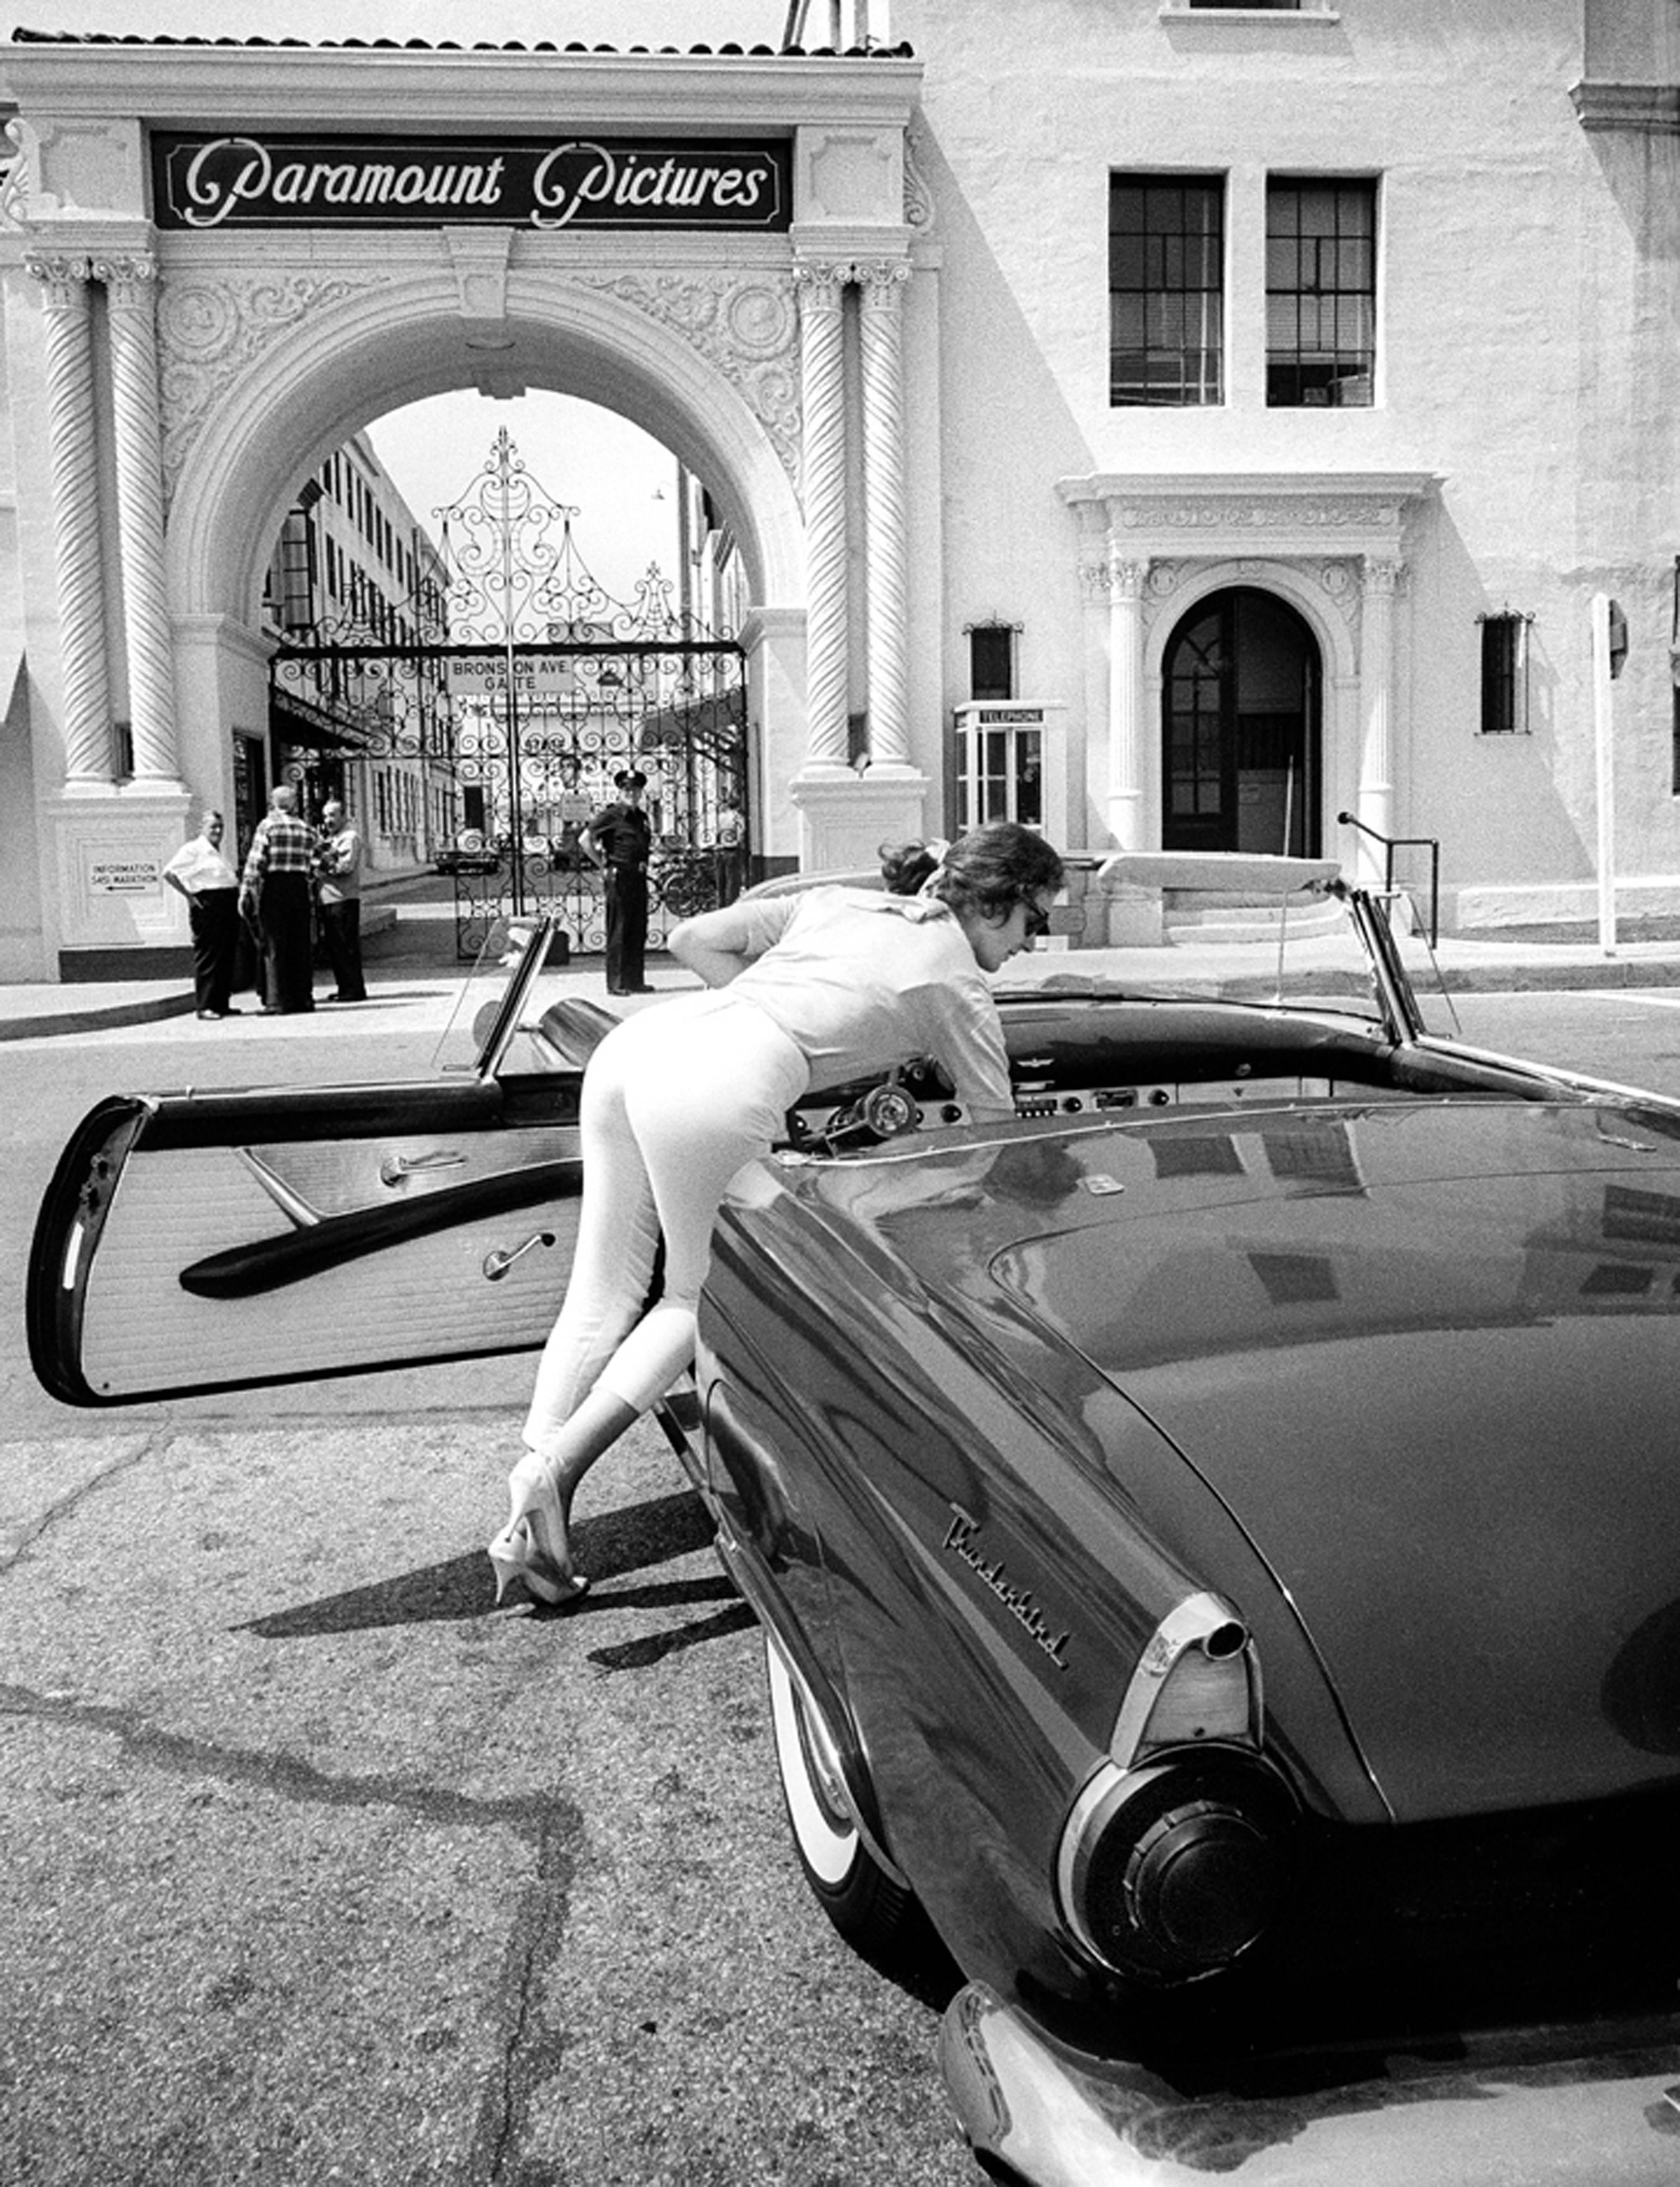 Julian Wasser Figurative Photograph - Woman with T-Bird at Paramount Pictures Studio, 1962